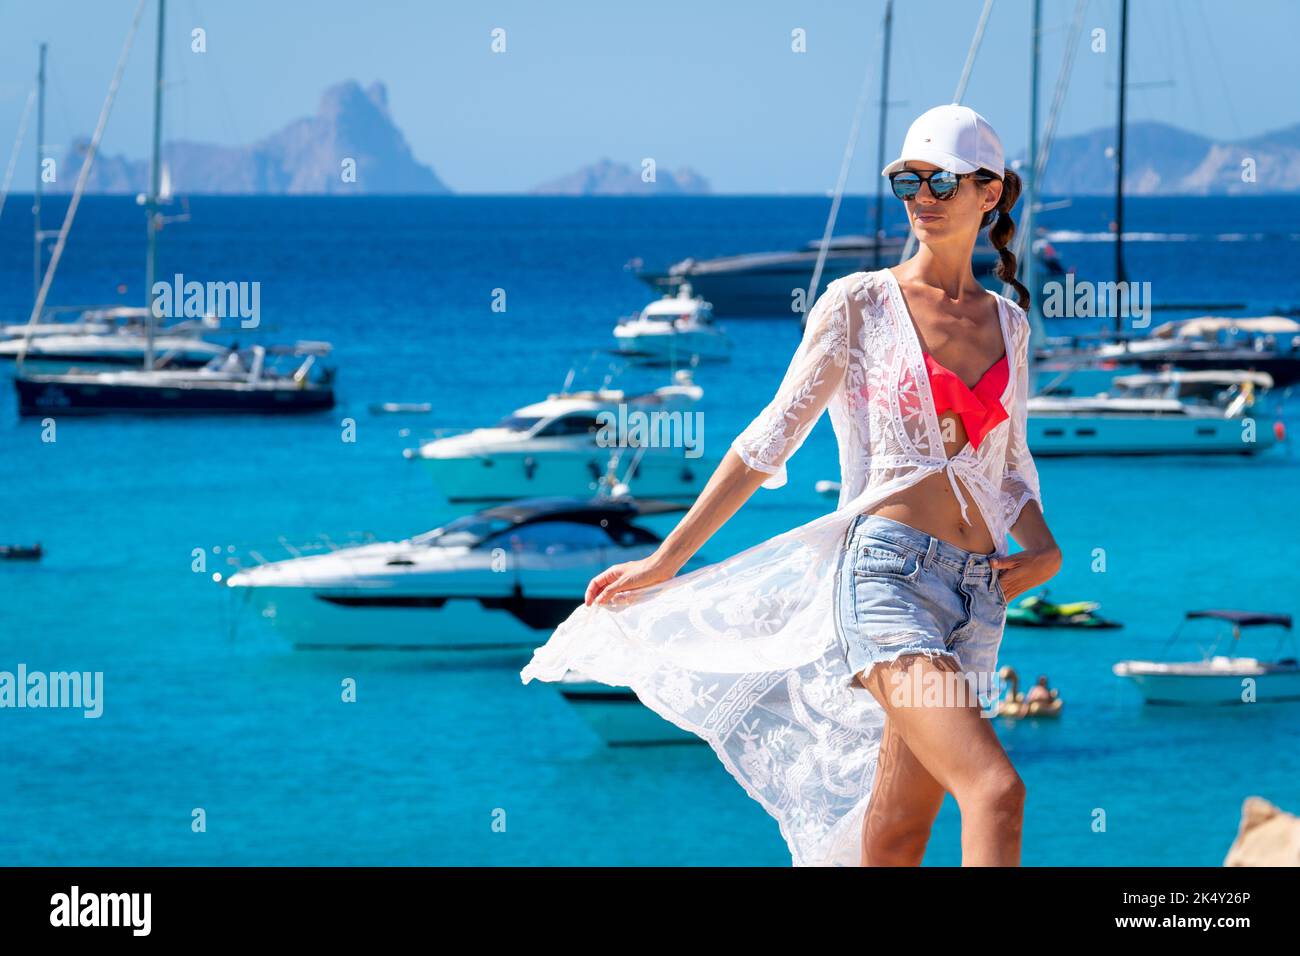 Brunette woman with white cap, crochet dress and shorts posing next to yachts in Formentera Stock Photo